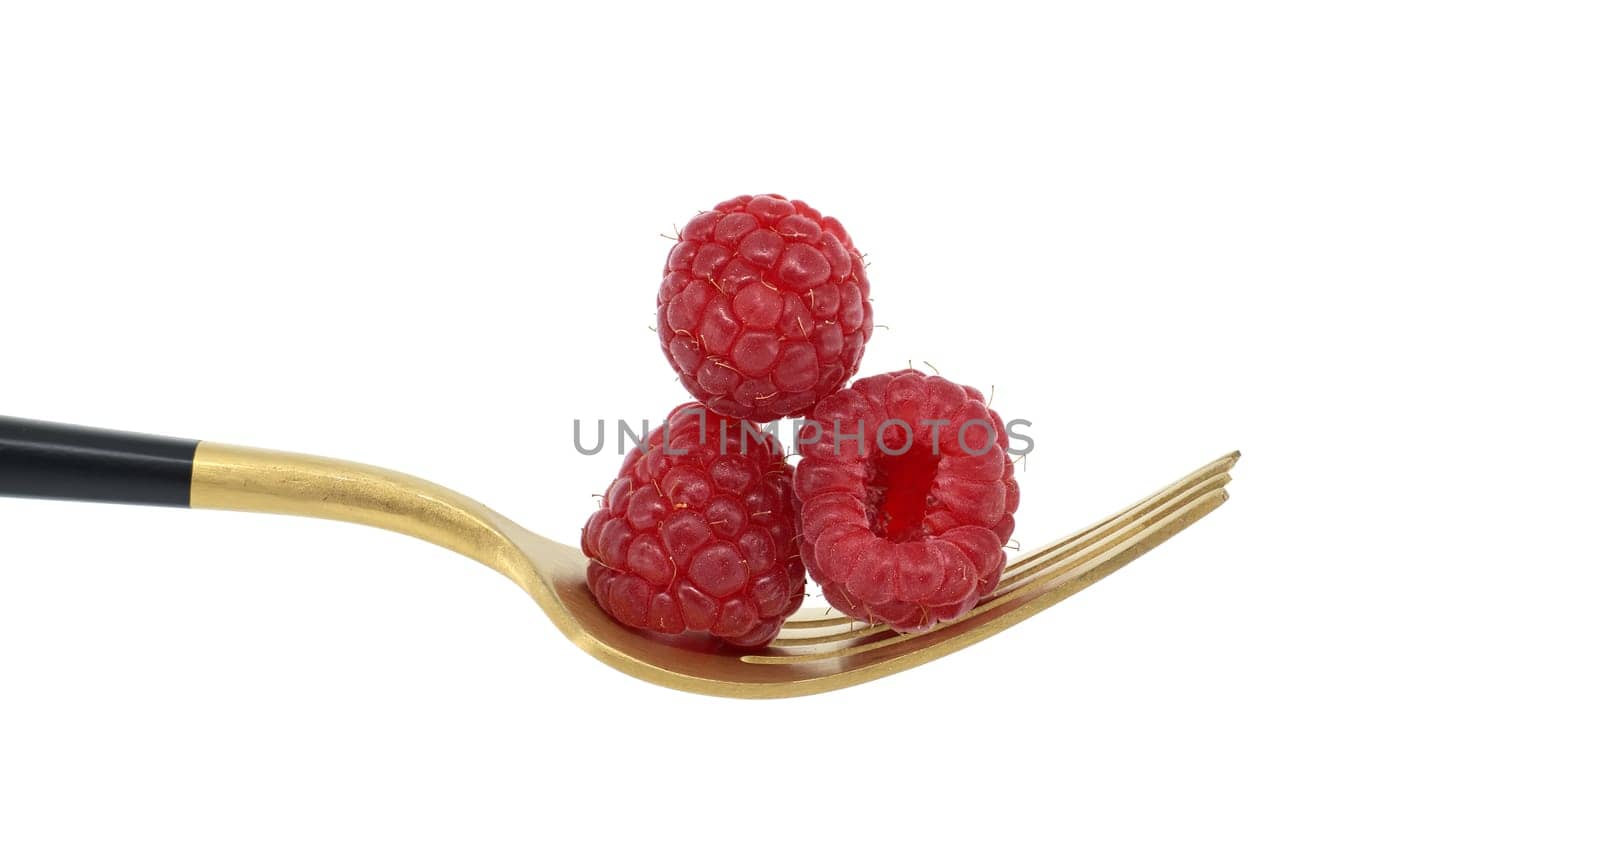 Ripe raspberries on a golden fork isolated on white background by NetPix